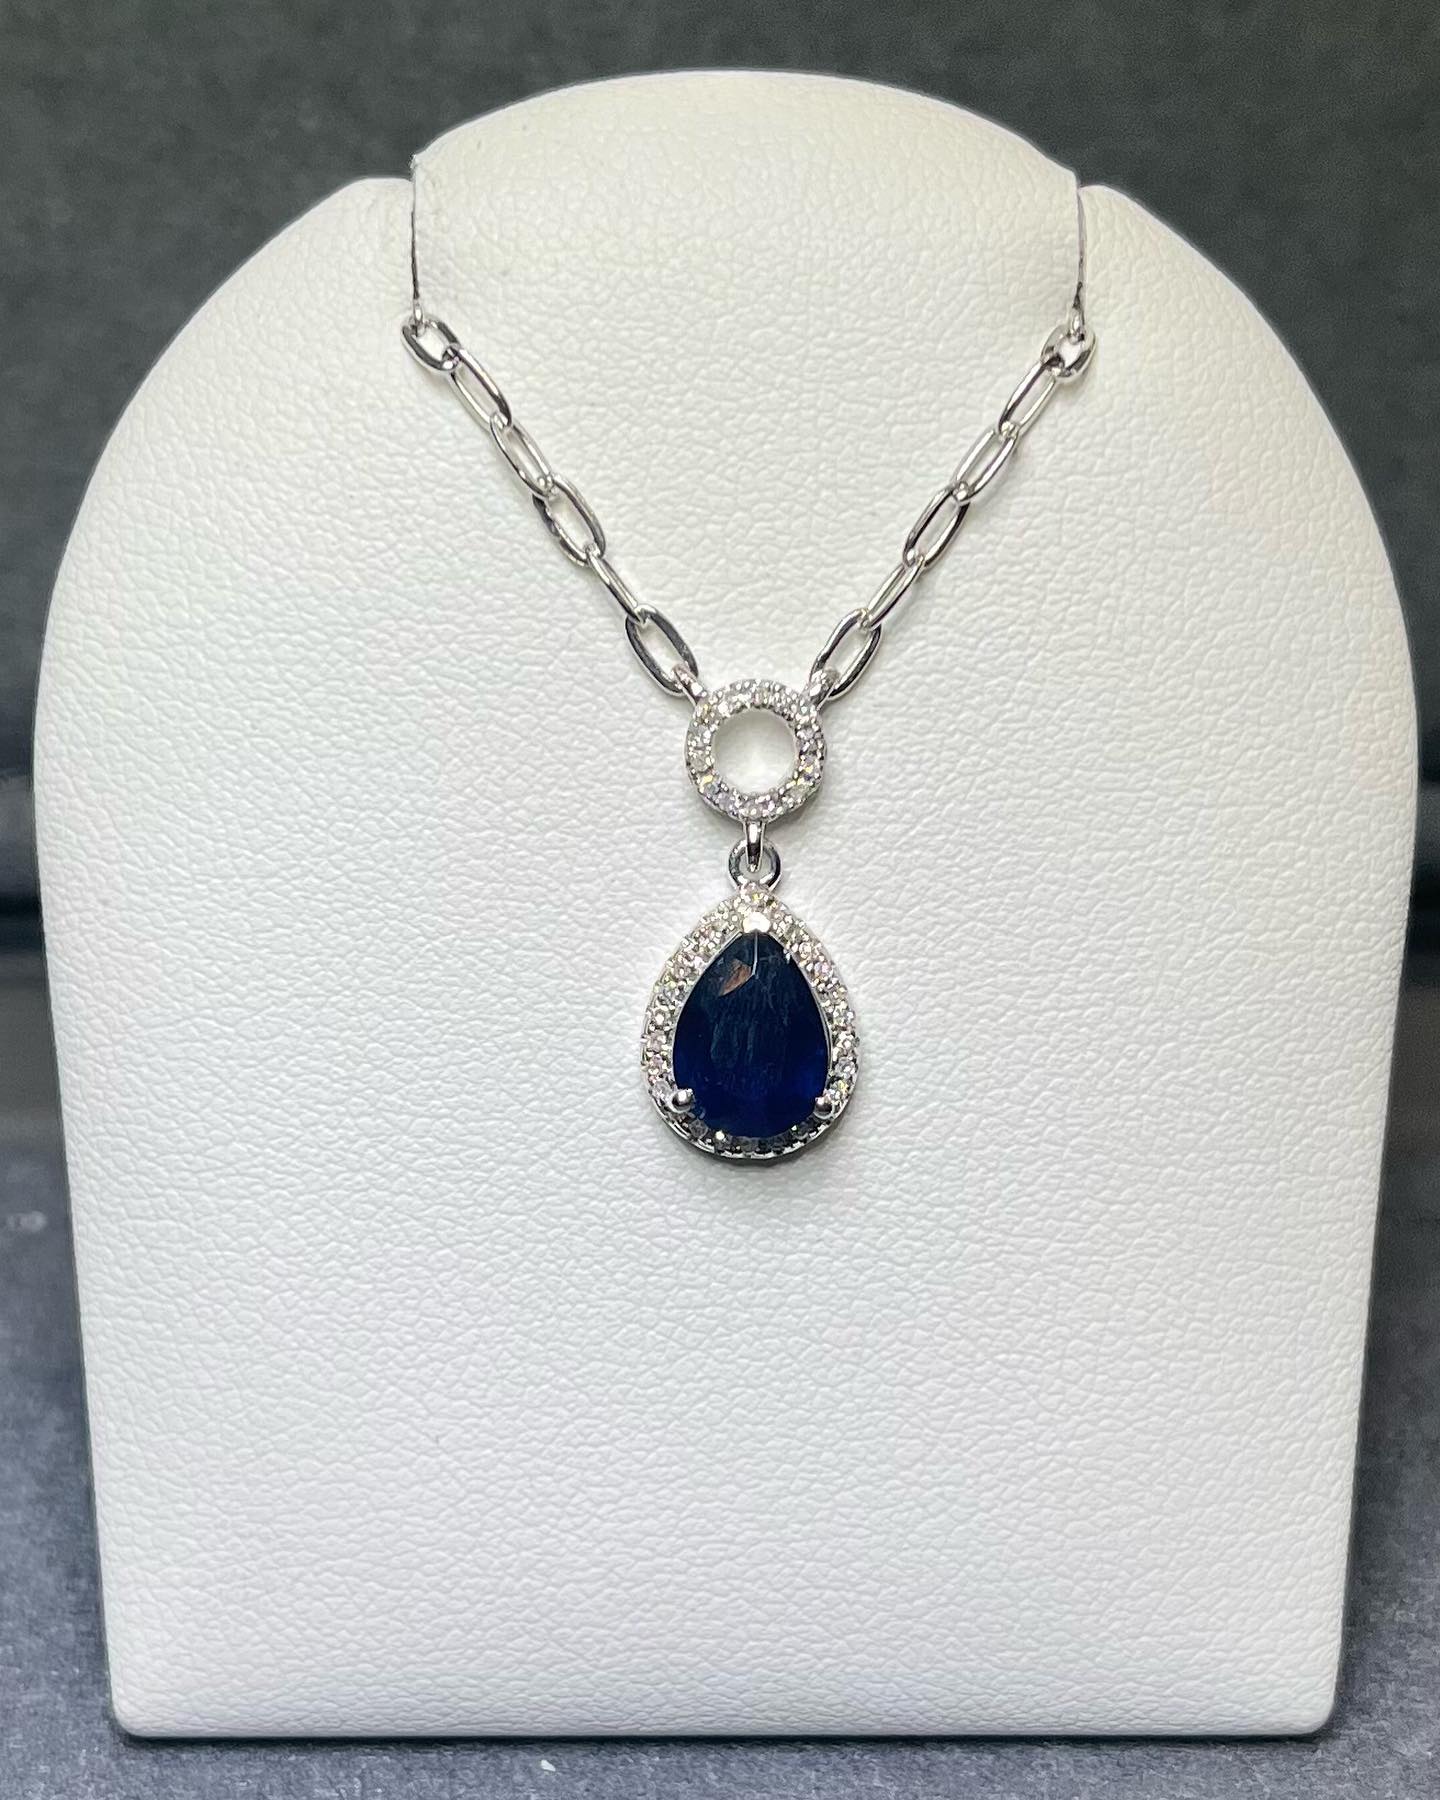 Silver necklace with a pear shaped blue gemstone display on a white jewelry holder